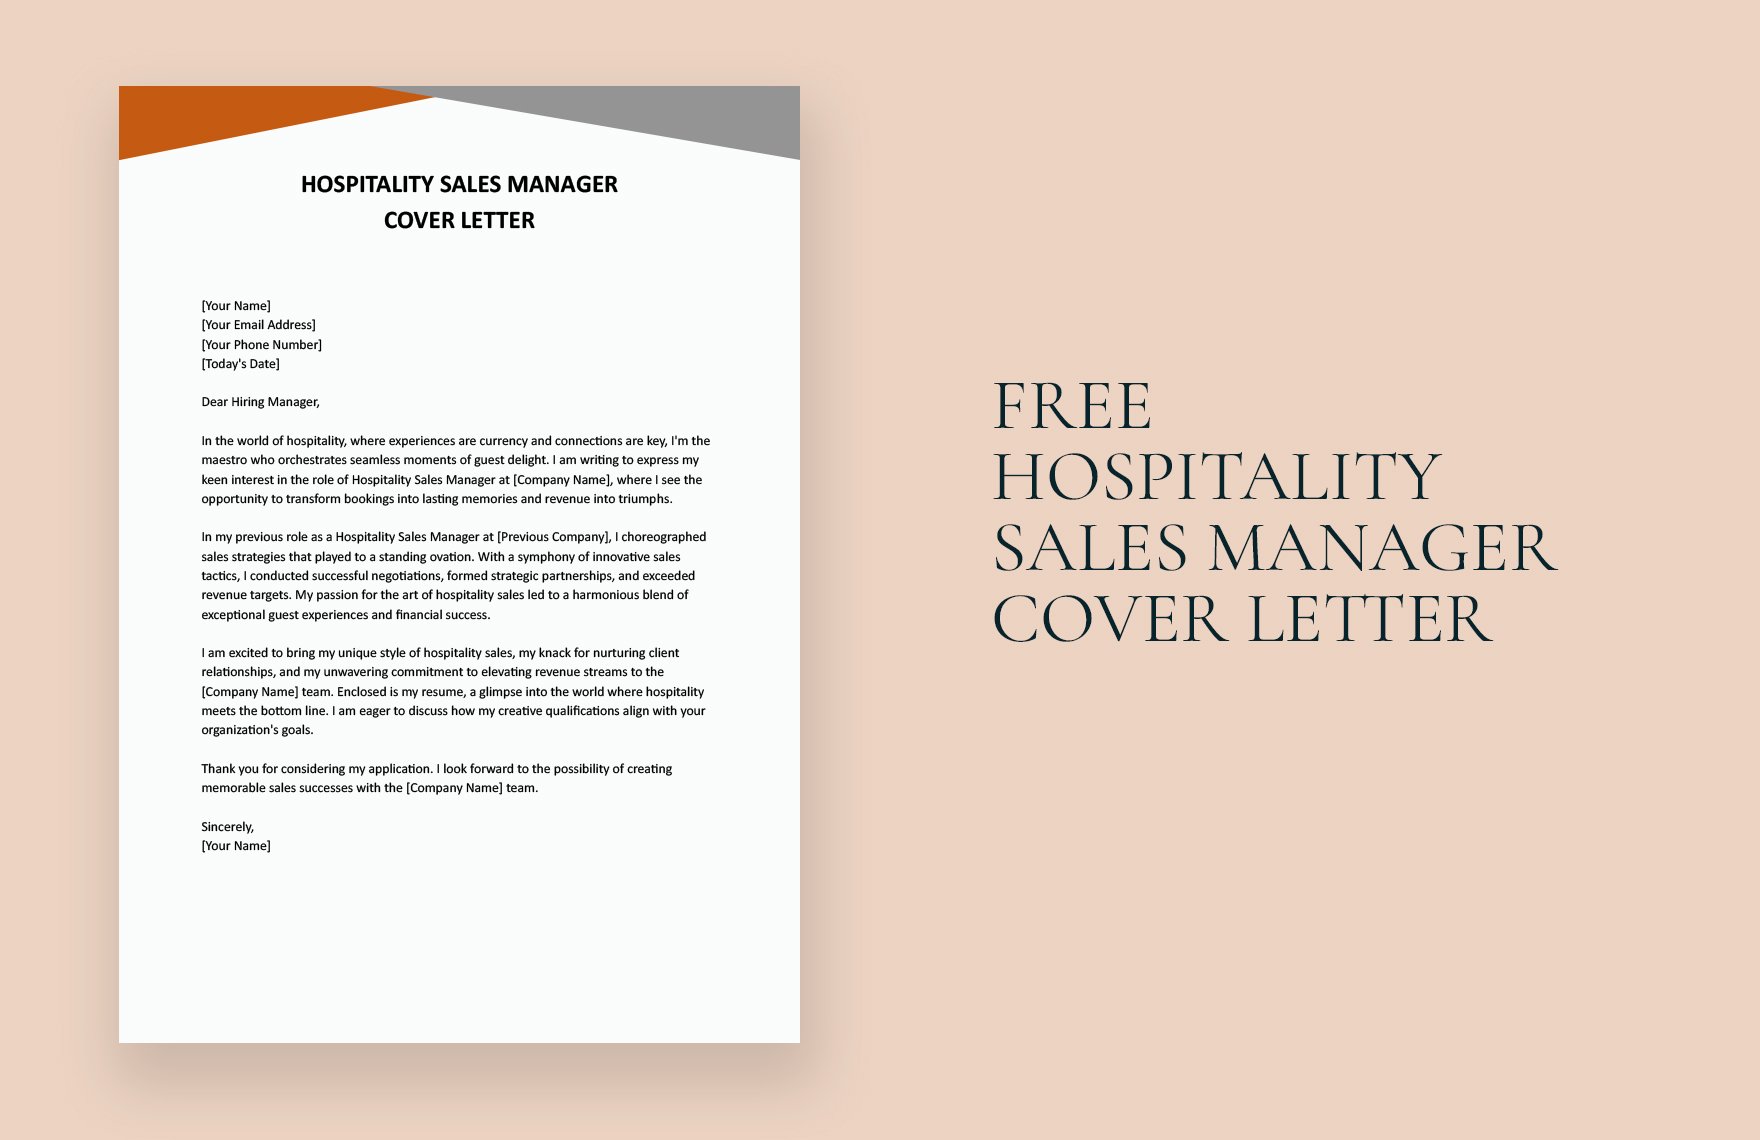 Hospitality Sales Manager Cover Letter